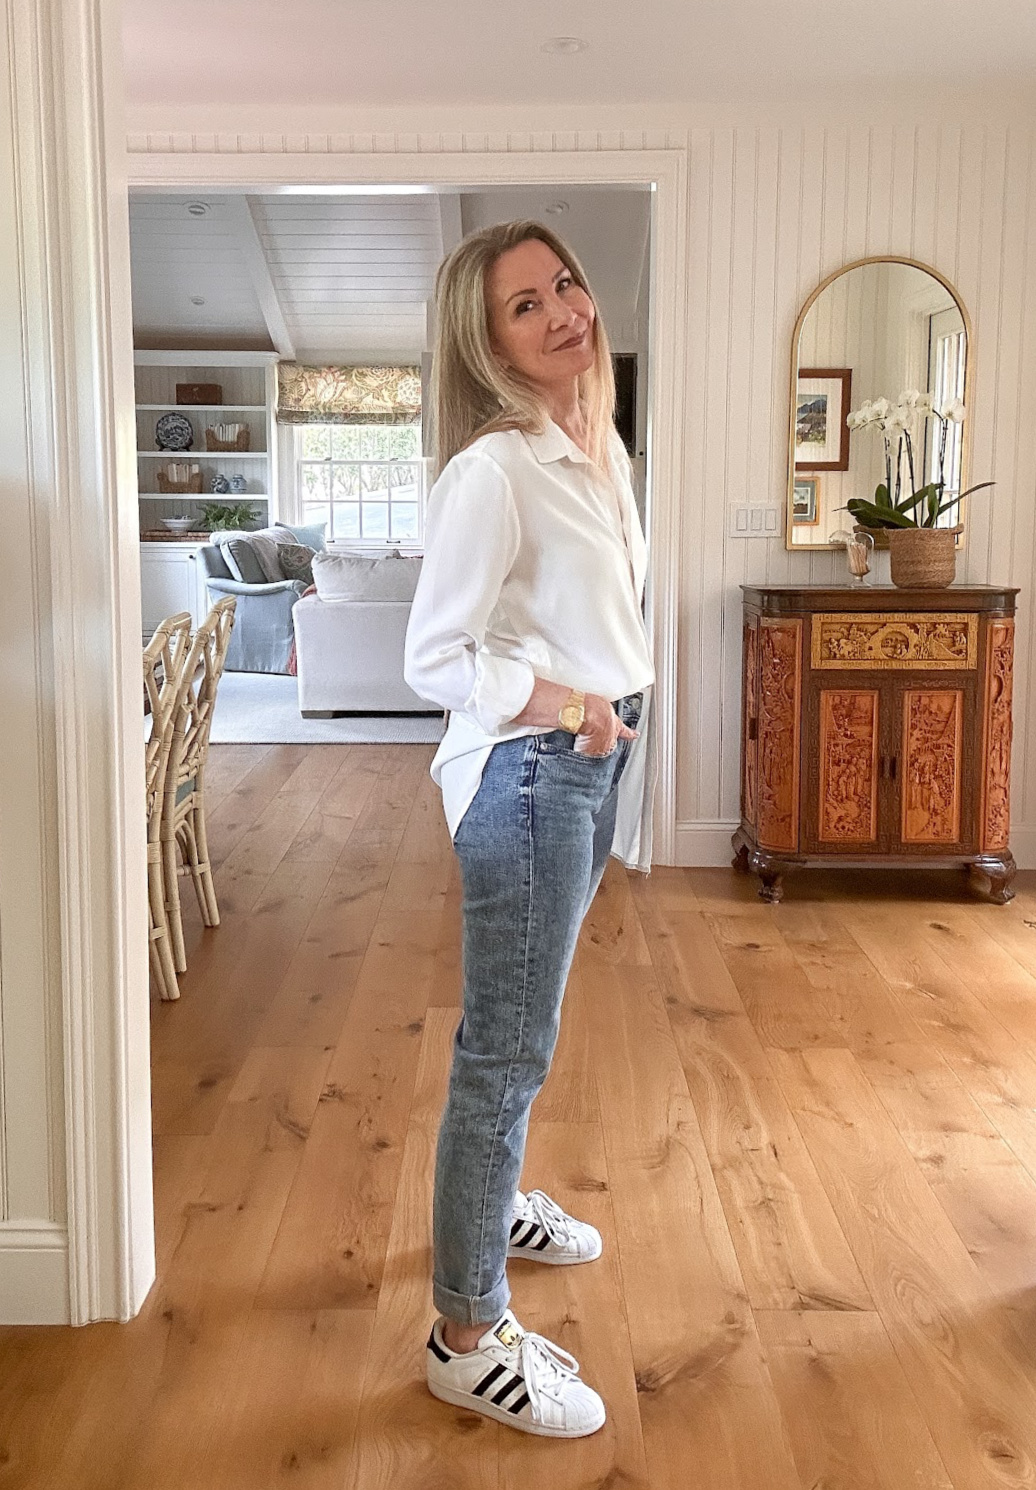 Woman wearing white shirt and jeans with Adidas Superstars.